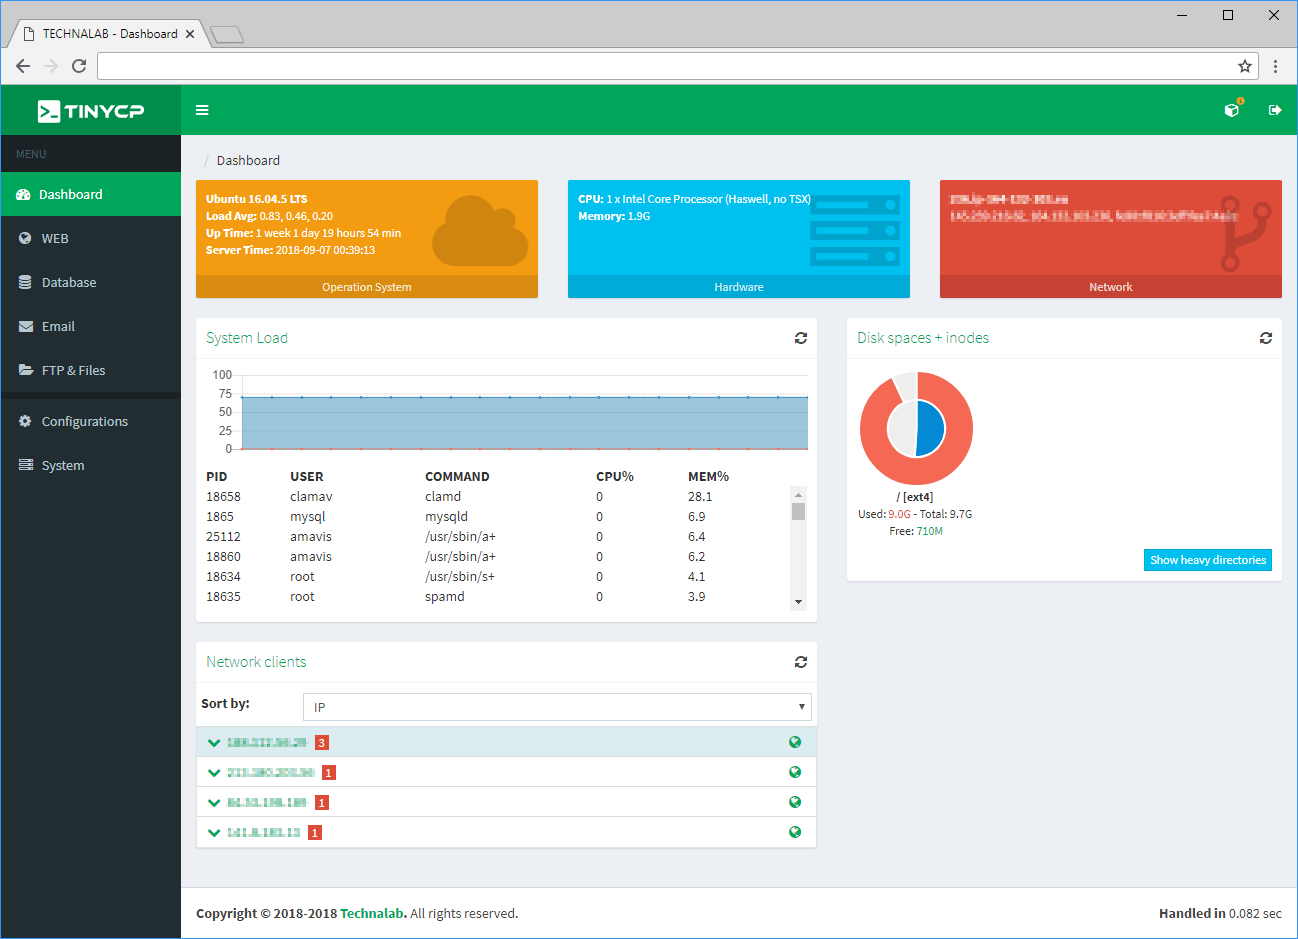 tinyCP opensource free web hosting control panel